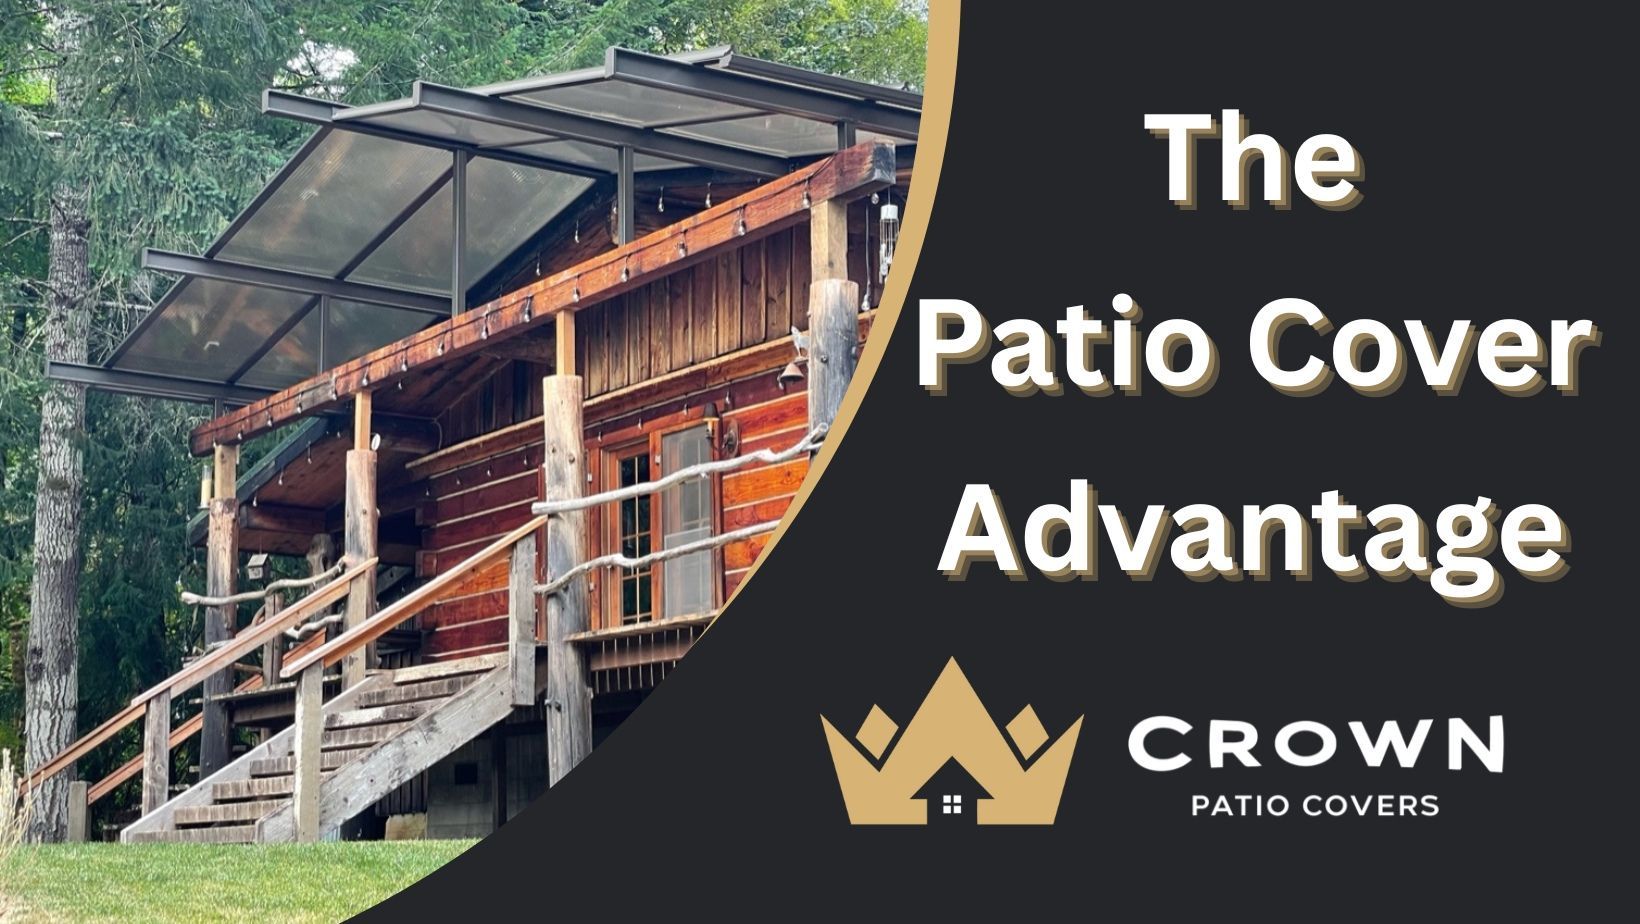 Patio Covers in Portland Oregon by Crown Patio Covers.